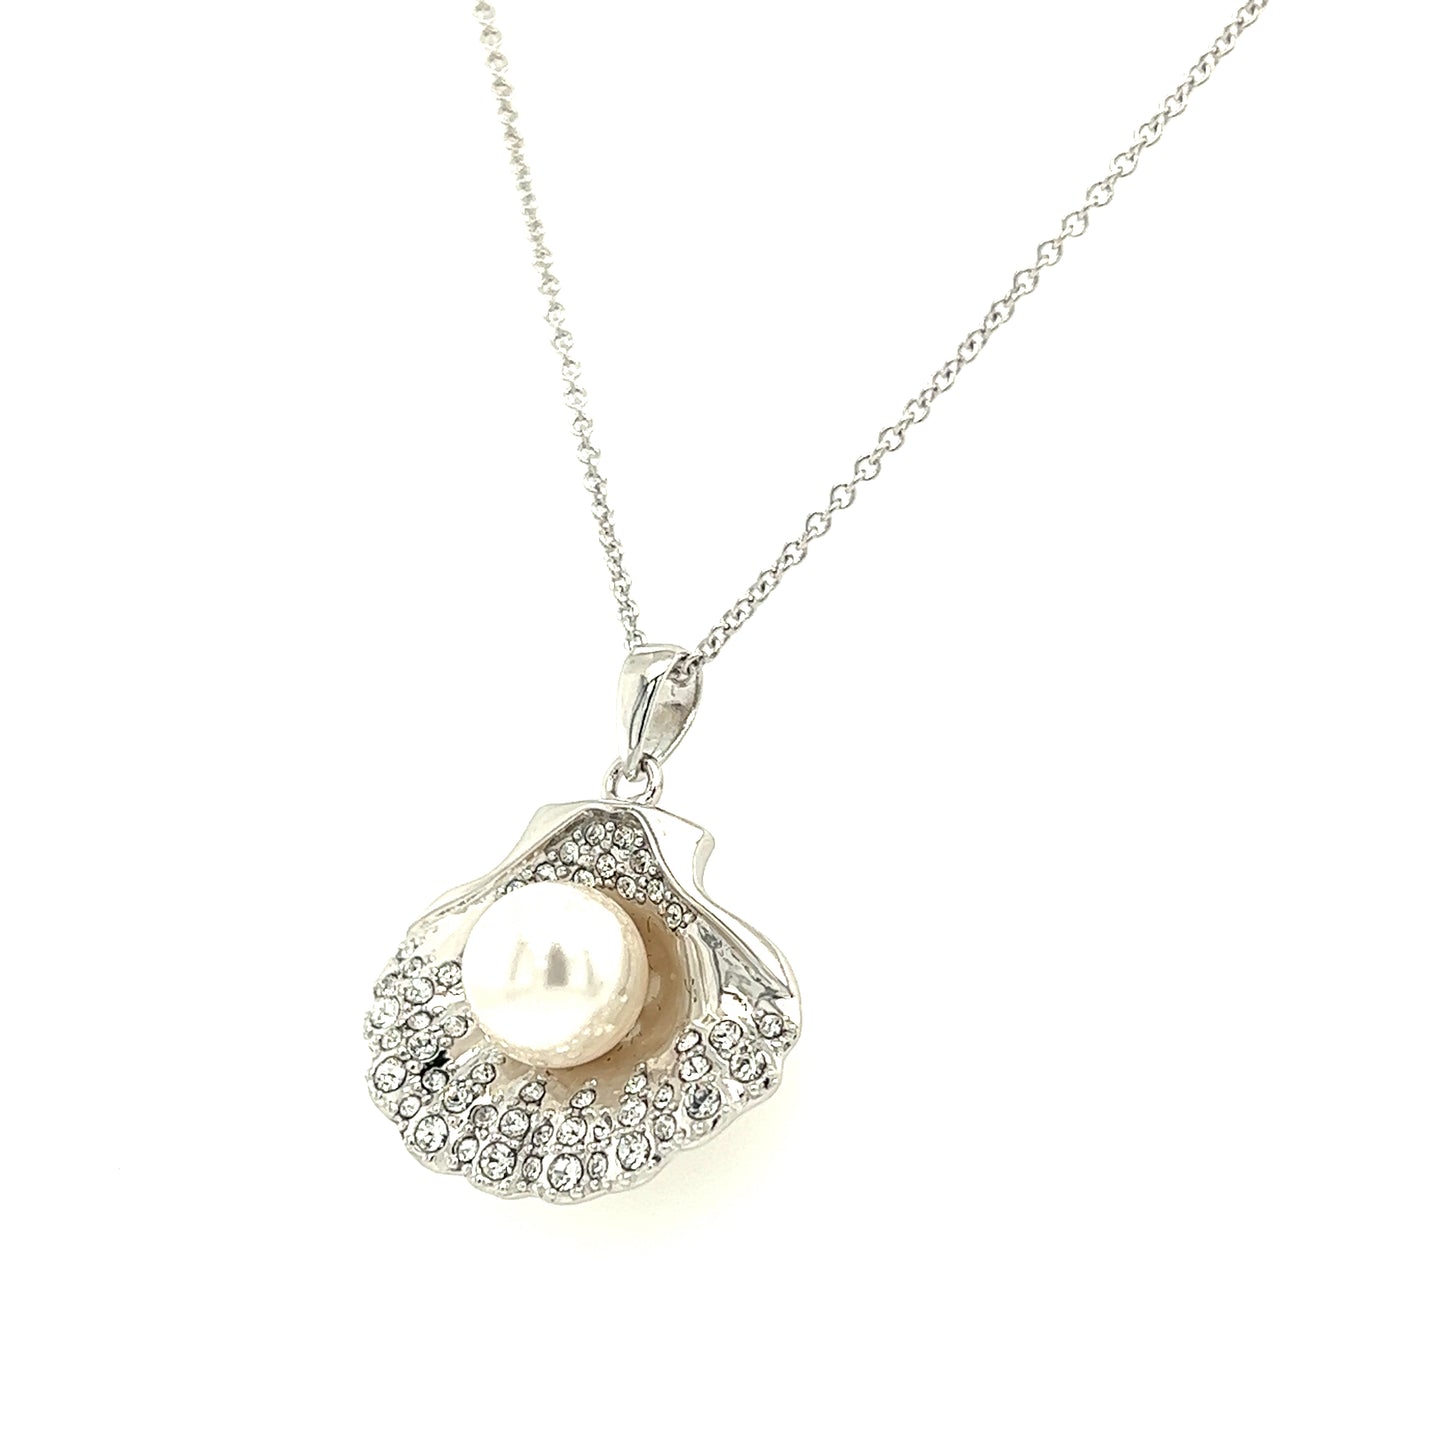 Scallop Shell Necklace with White Pearl and White Crystals in Sterling Silver Right Side View